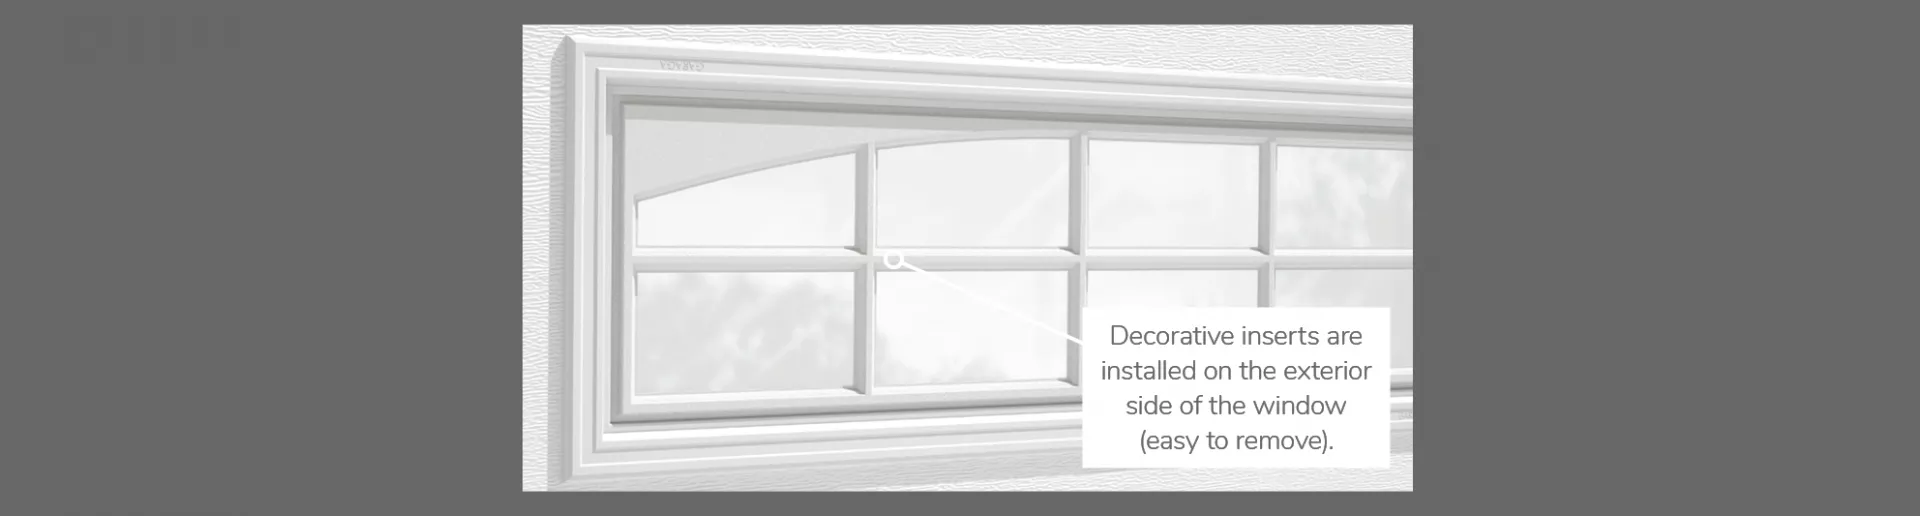 Double Stockton Arch Decorative Insert, 40" x 13" or 41" x 16", available for door R-16, 3 layers - Polystyrene,  2 layers - Polystyrene and Non-insulated